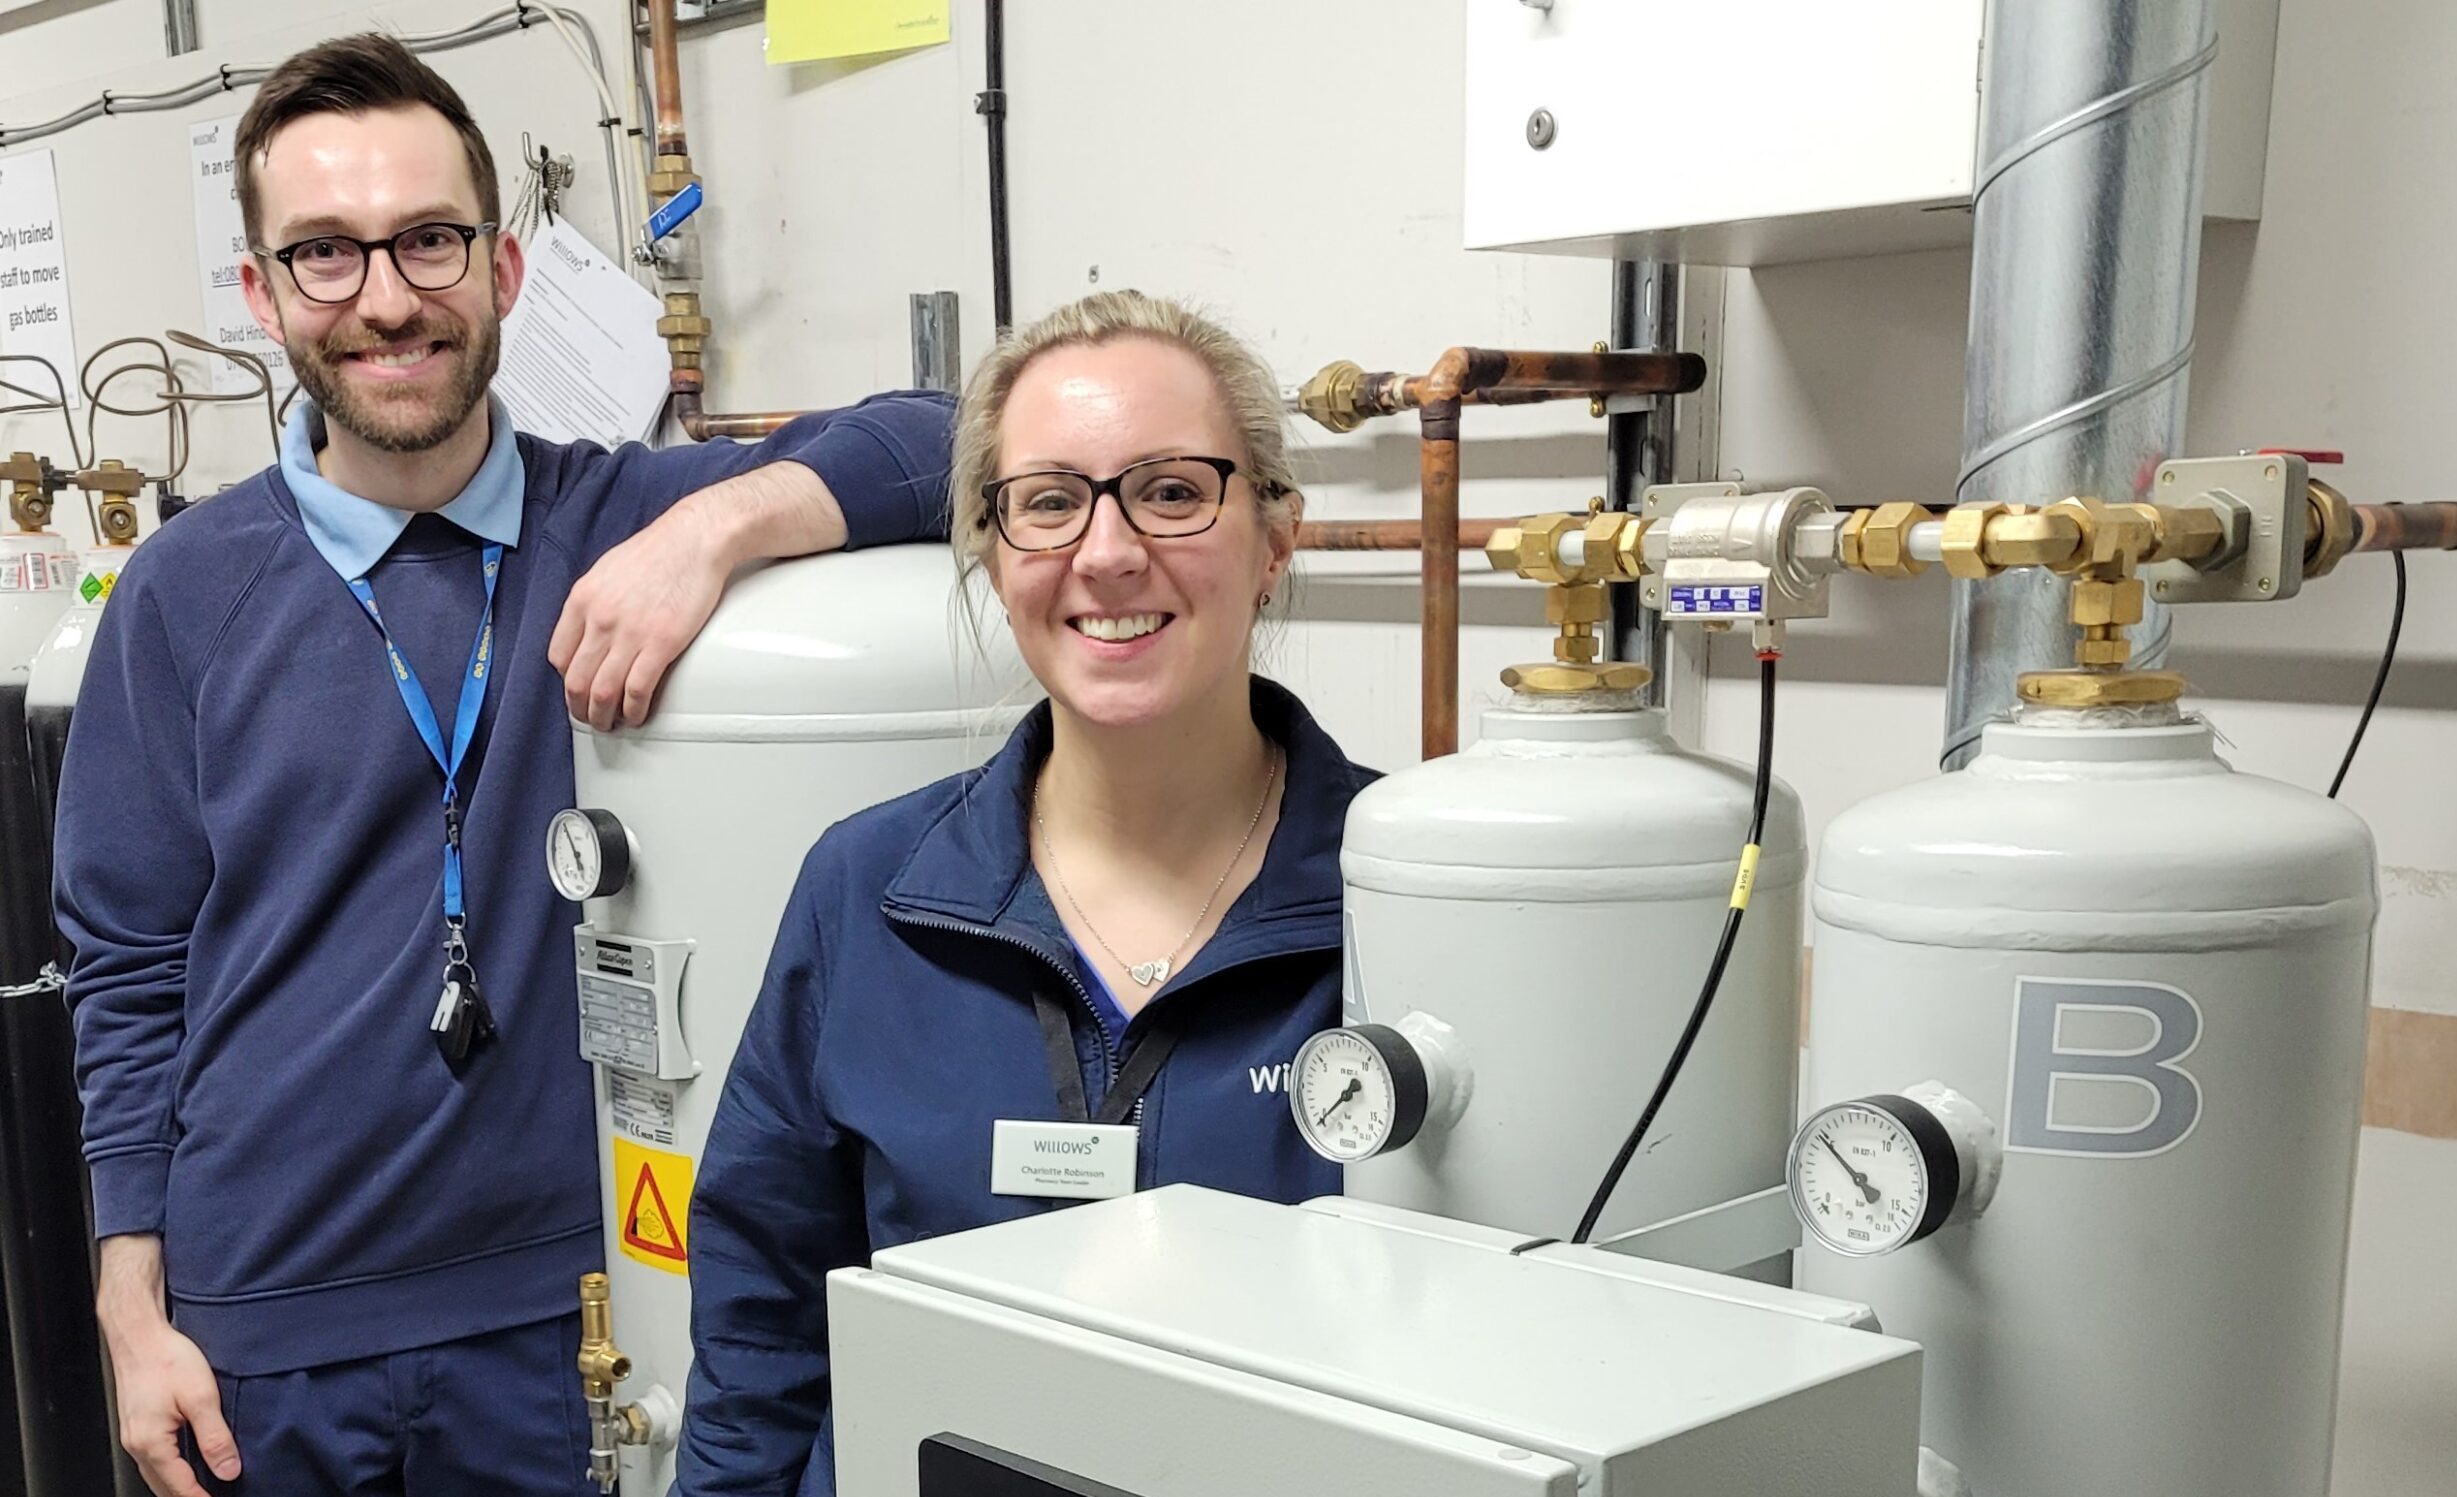 WILLOWS CONTINUES SUSTAINABILITY QUEST WITH OXYGEN GENERATOR